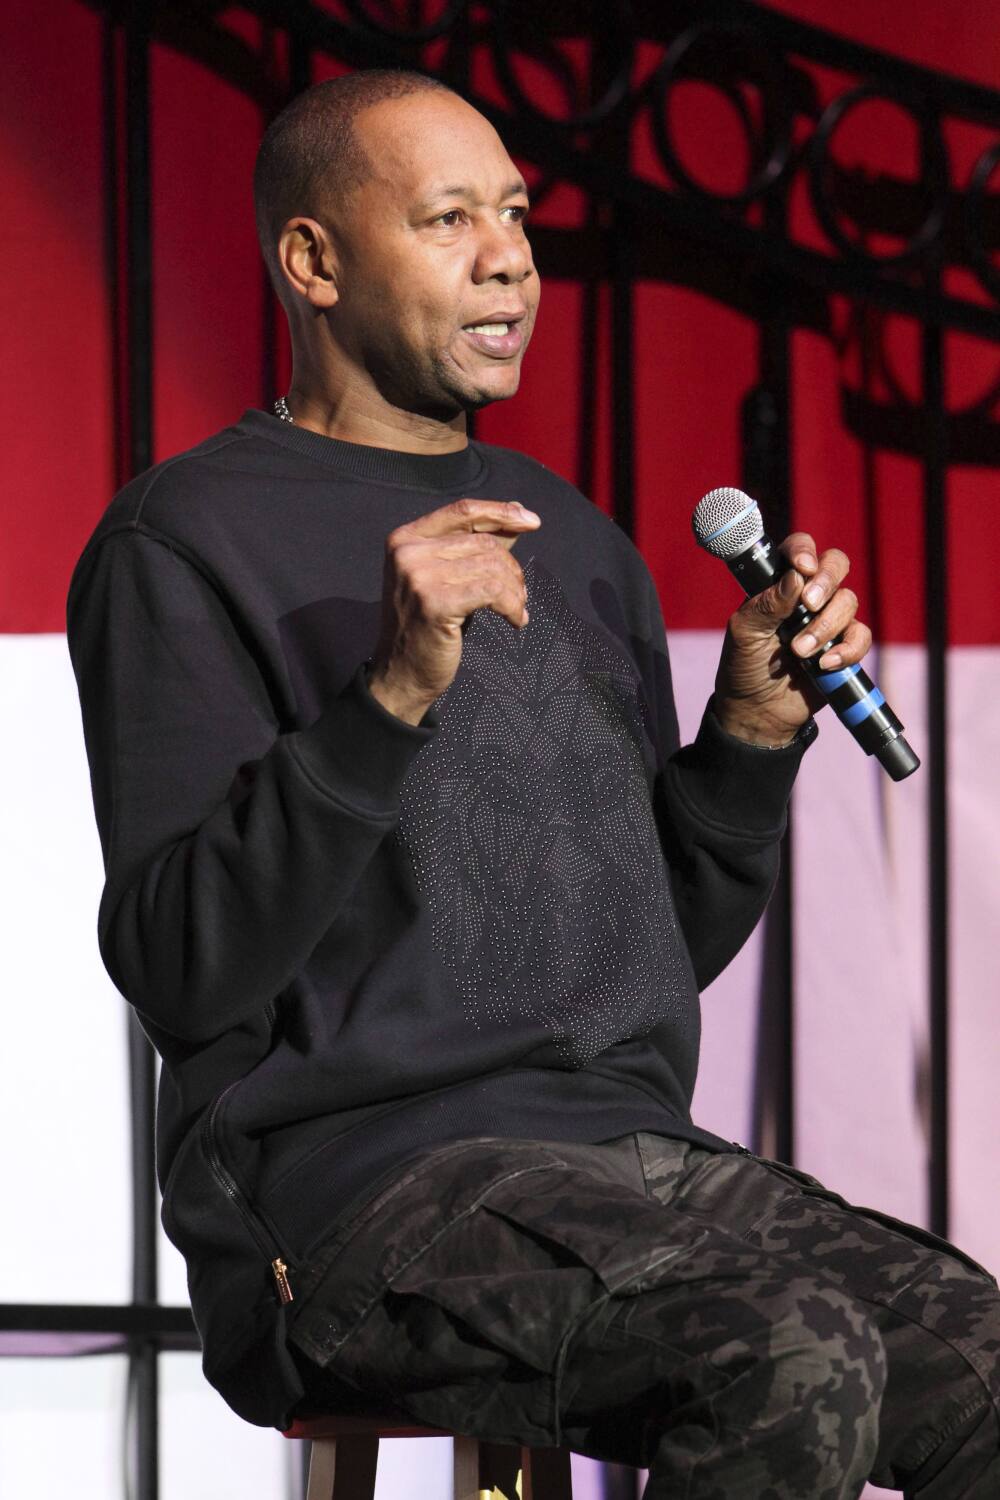 Mark Curry thought he was being pranked during racist incident he livestreamed